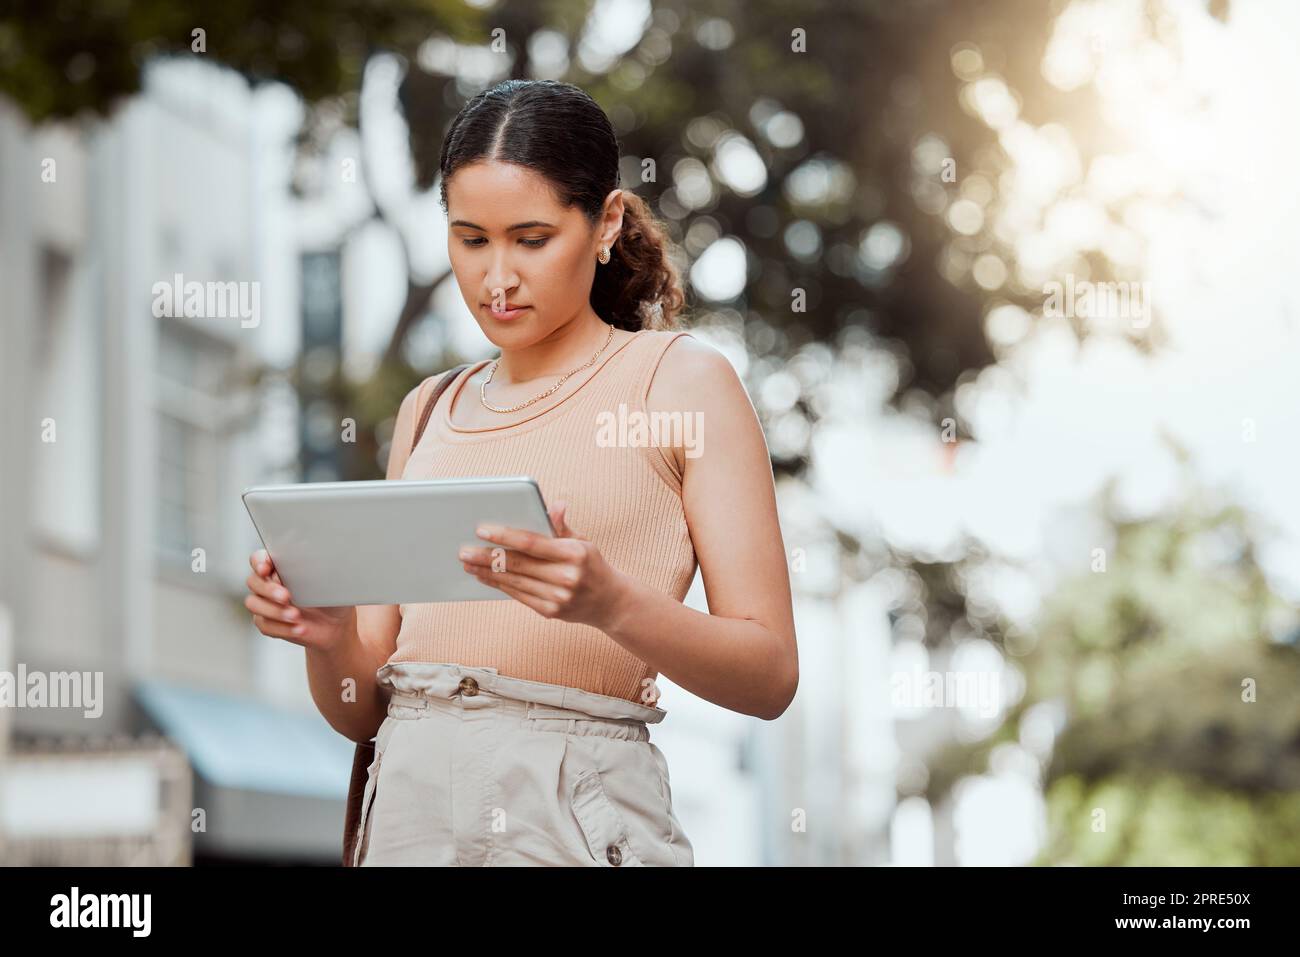 Reading, checking or browsing social media on tablet while out commuting through city and looking for directions or inspiration online. Young entrepreneur using business website tool for ideas Stock Photo